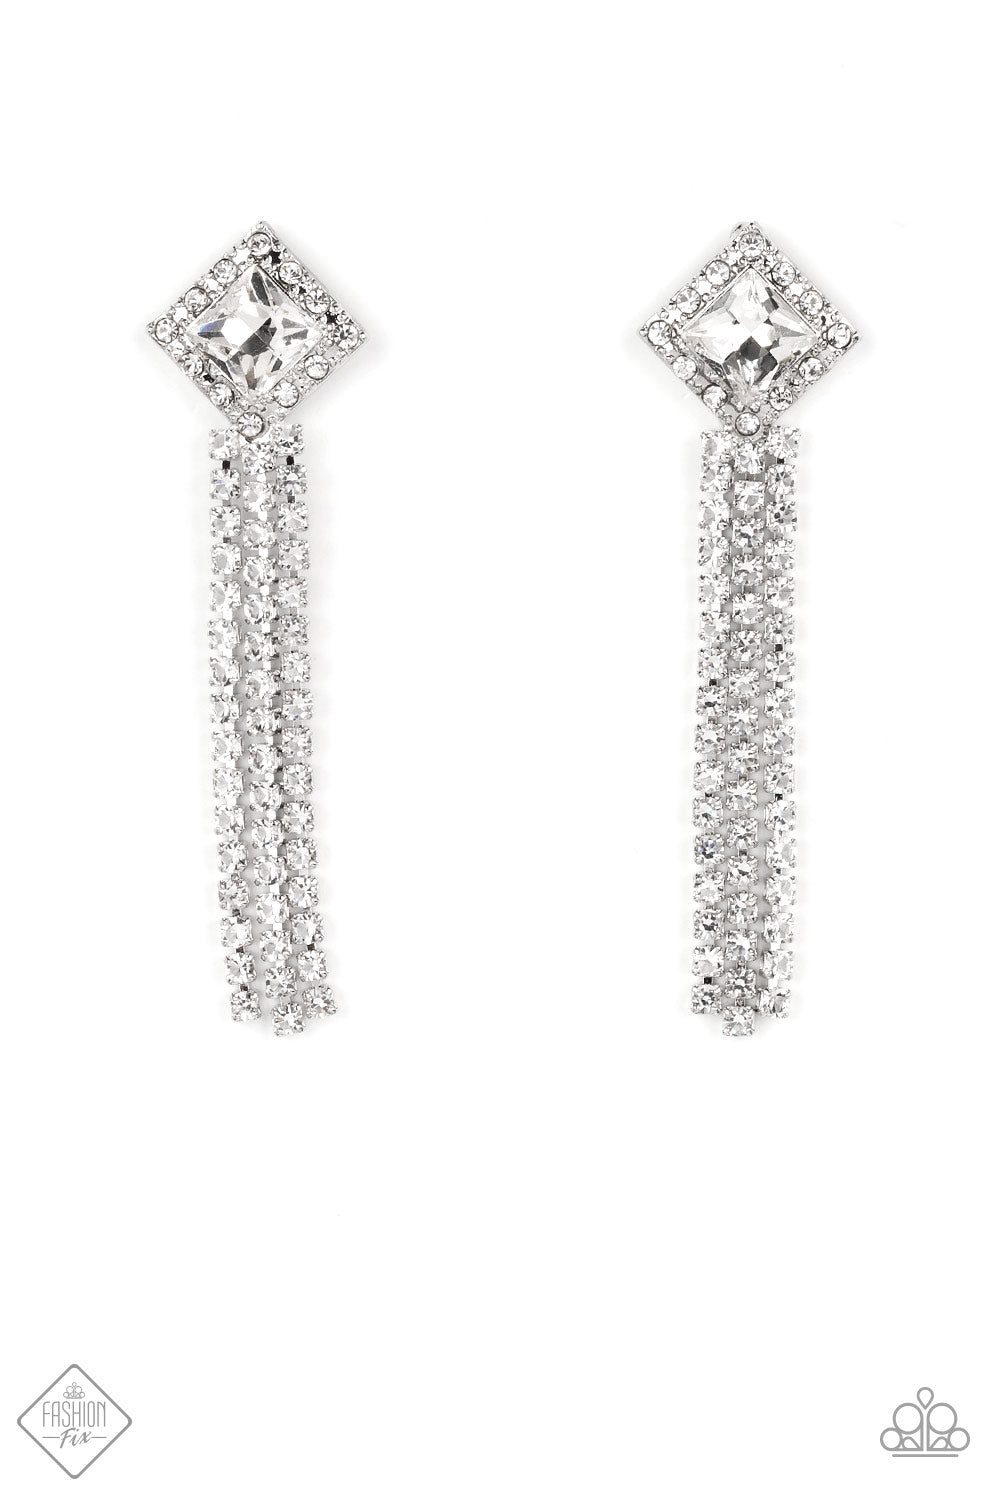 Seasonal Sparkle - White Rhinestone - Silver Fashion Earrings - Paparazzi Accessories - A brilliant, square-cut white rhinestone is bordered by tiny sparkling accents and tilted on a point, creating a dramatic anchoring point from which streams of glittery, square-cut rhinestones cascade from the ear in a glitzy finish. Earring attaches to a standard post fitting. Sold as one pair of post earrings.